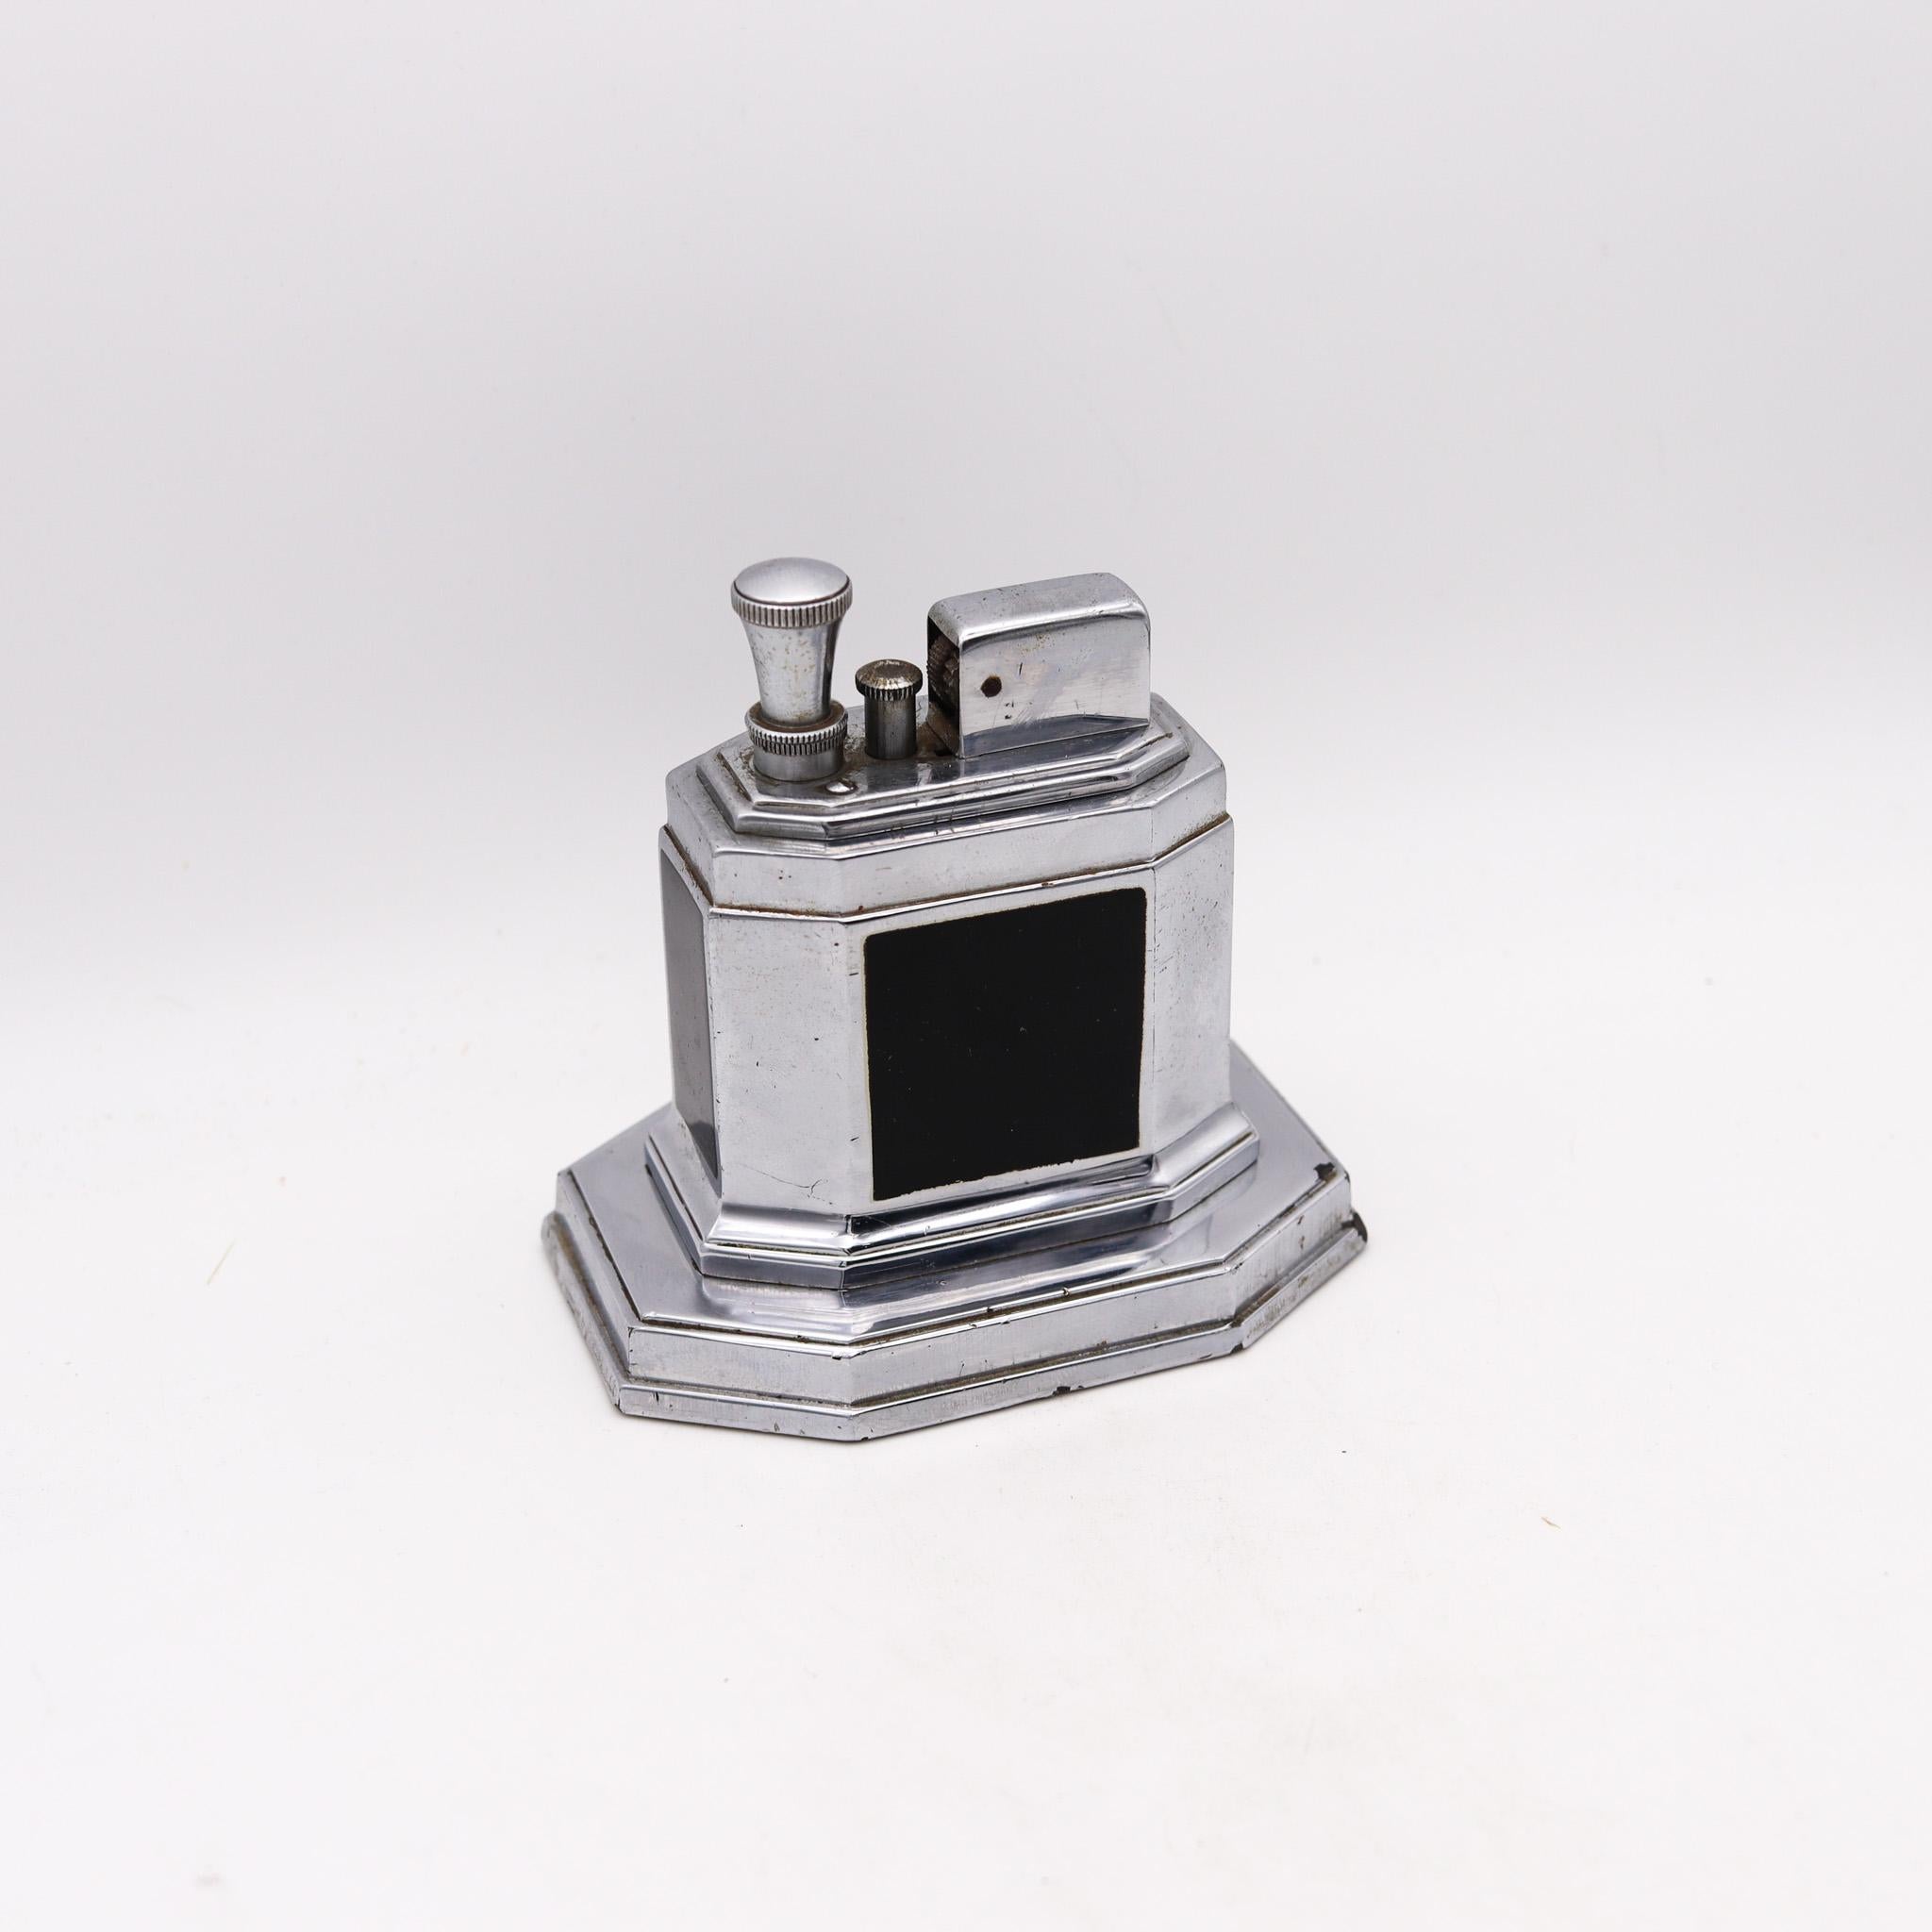 An Octette desk lighter designed by Ronson.

This Ronson Touch-Tip Octette table lighter was made between 1935 and 1951 by the Ronson Art Metal Works Inc. located in Newark, New Jersey in the United States. This lighter began a very successful era